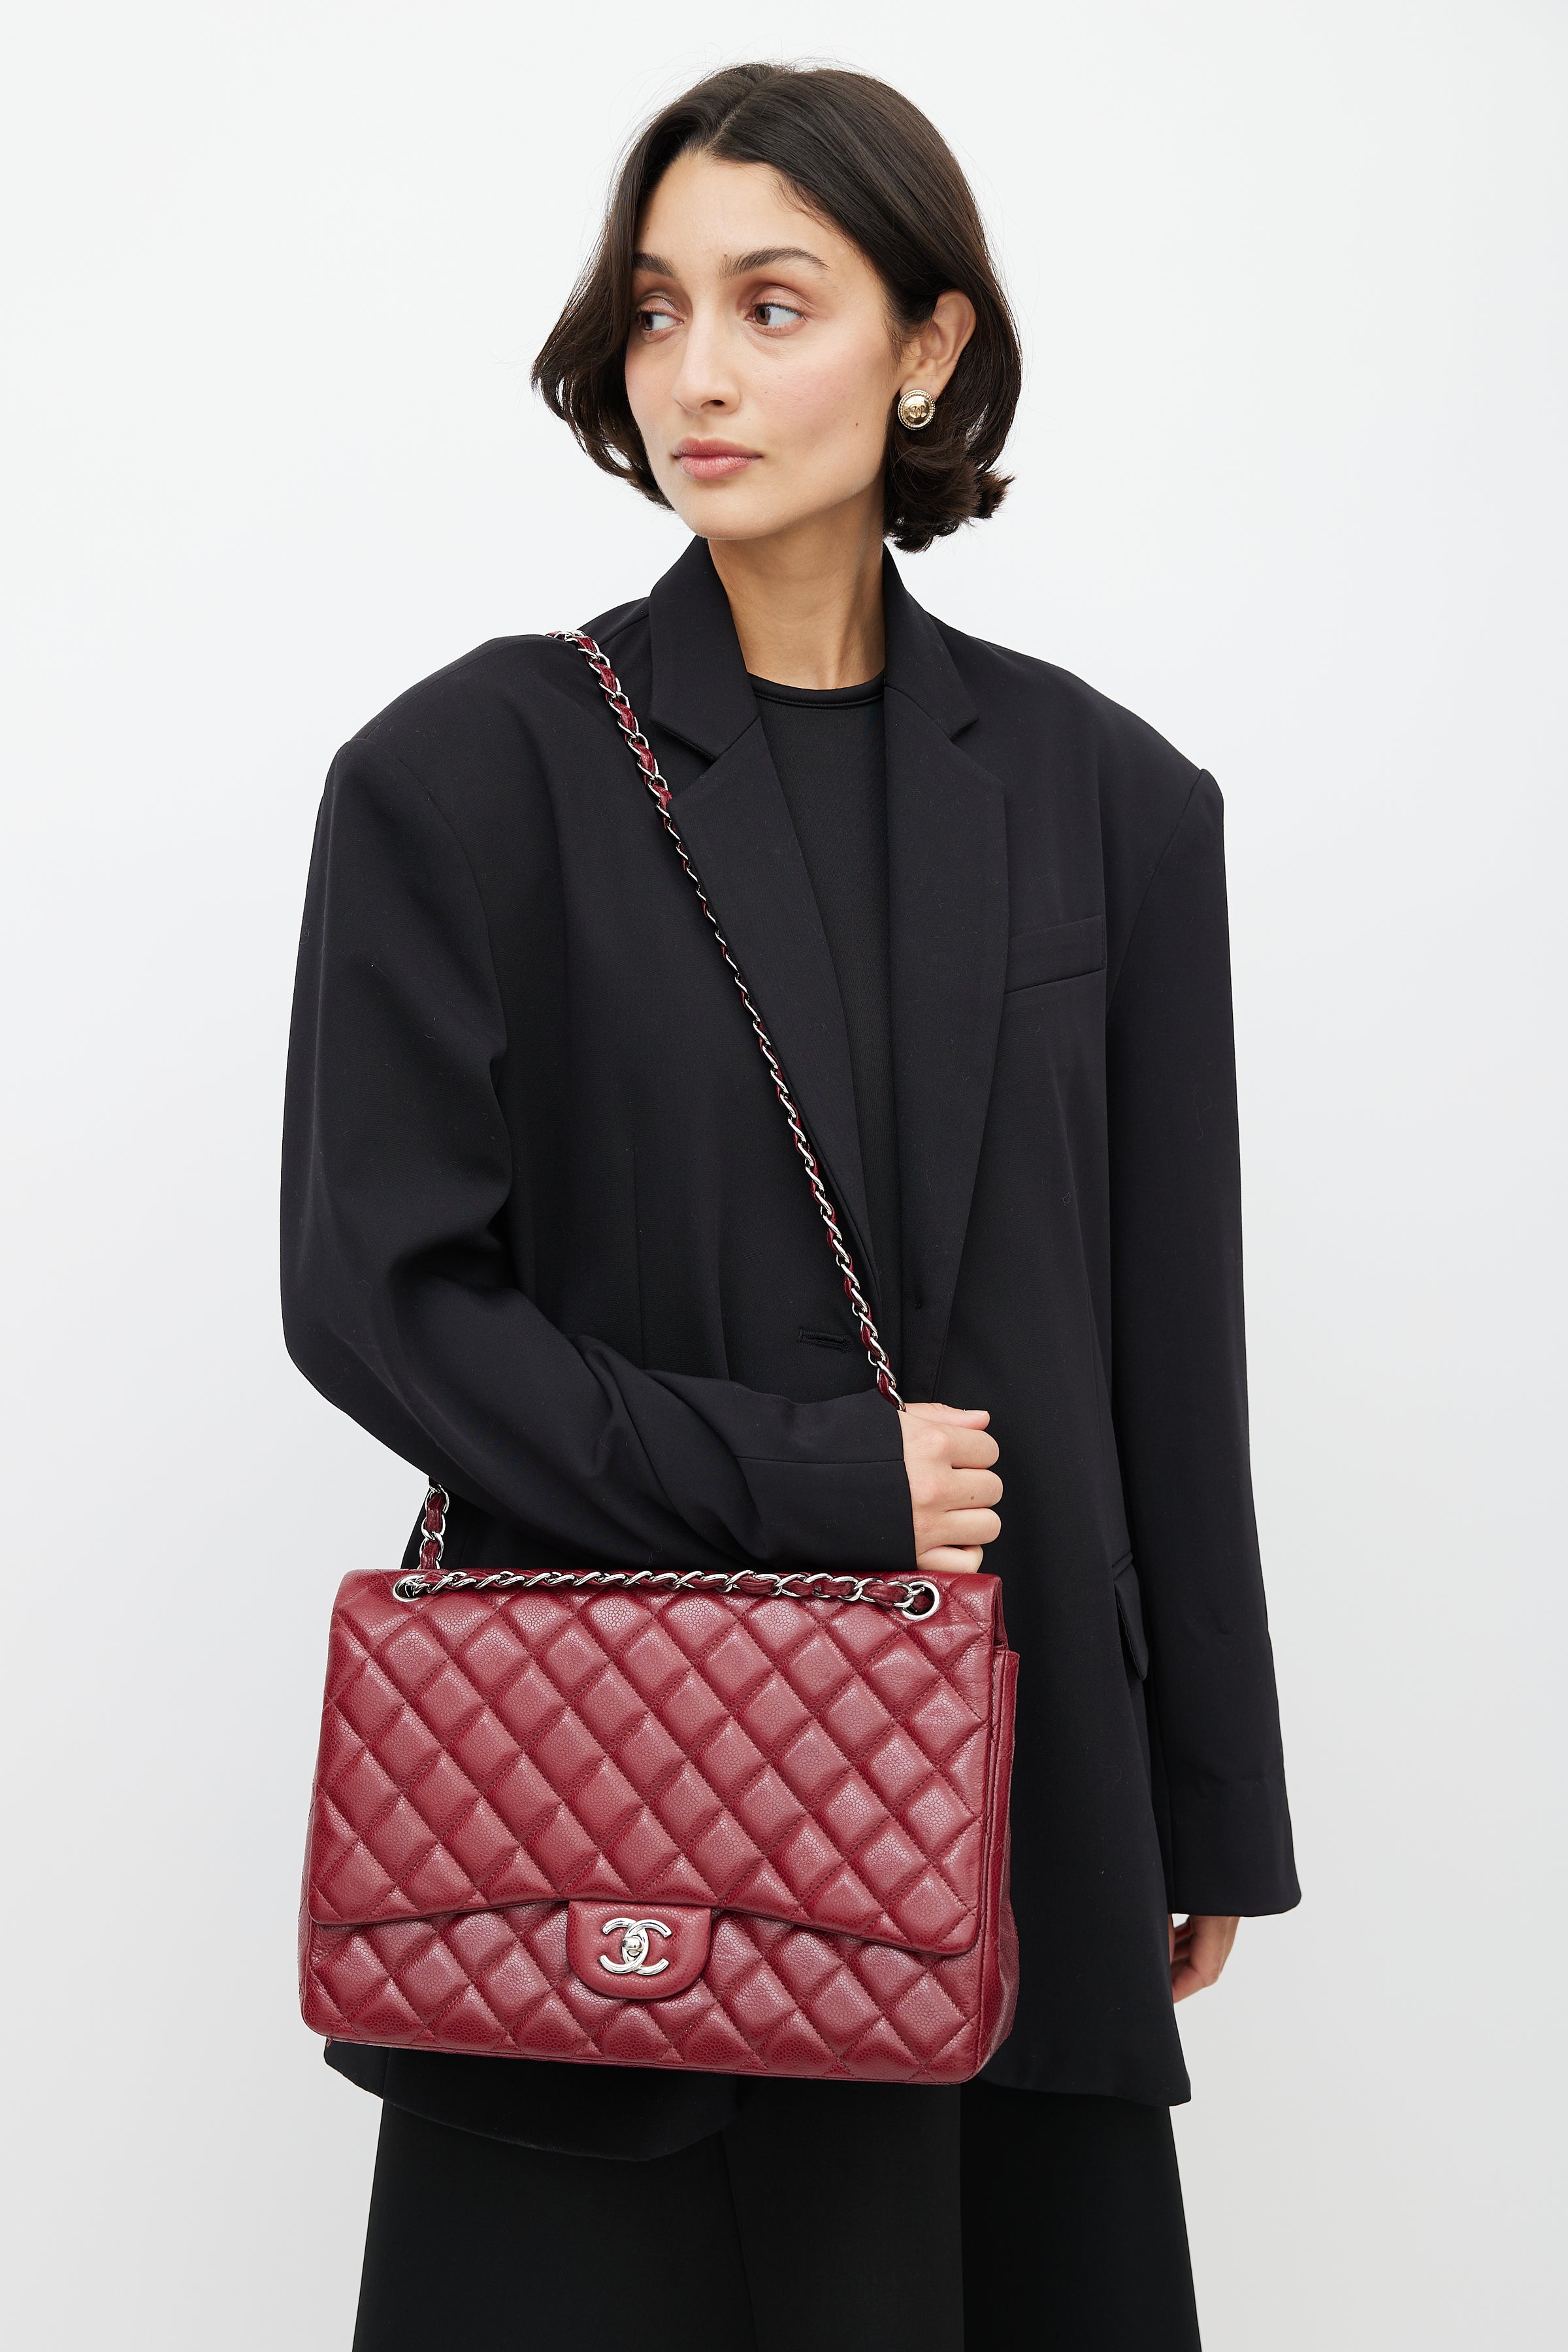 Chanel Burgundy Quilted Leather Medium Classic Double Flap Bag Chanel